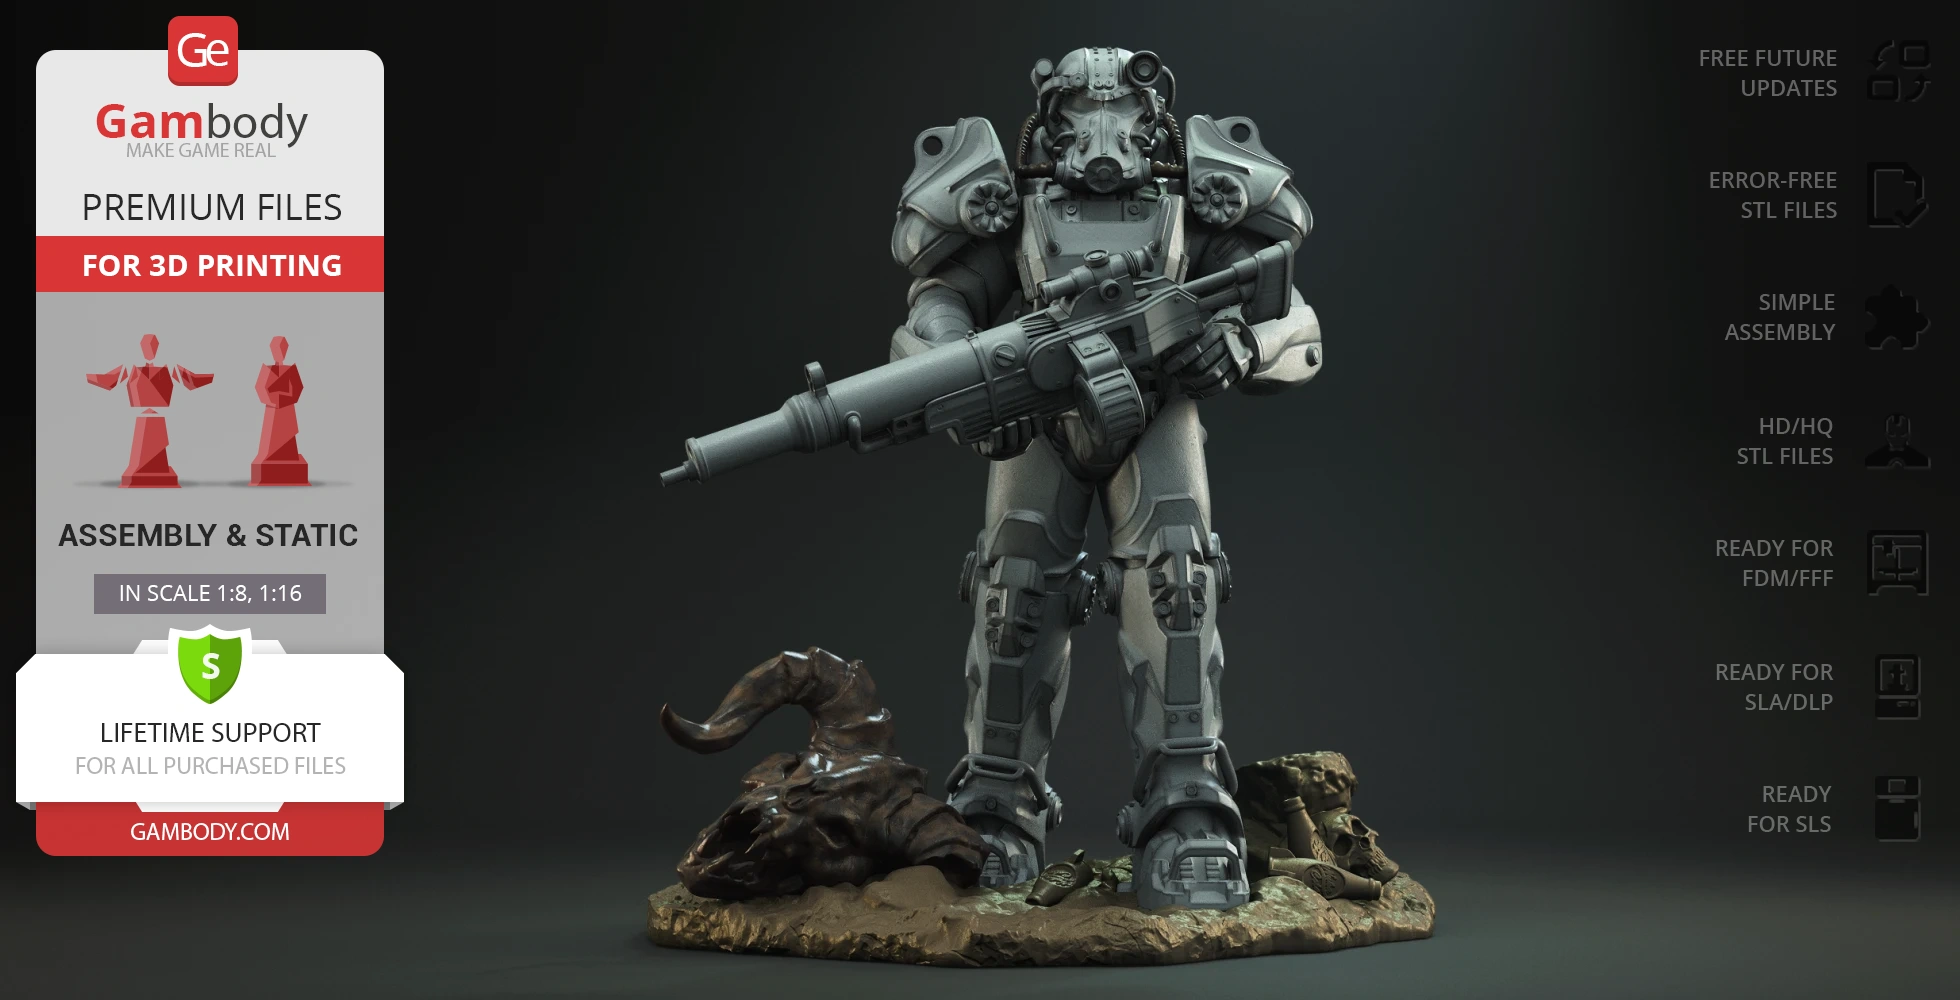 Buy T-60 Power Armor Suit 3D Printing Figurine | Assembly